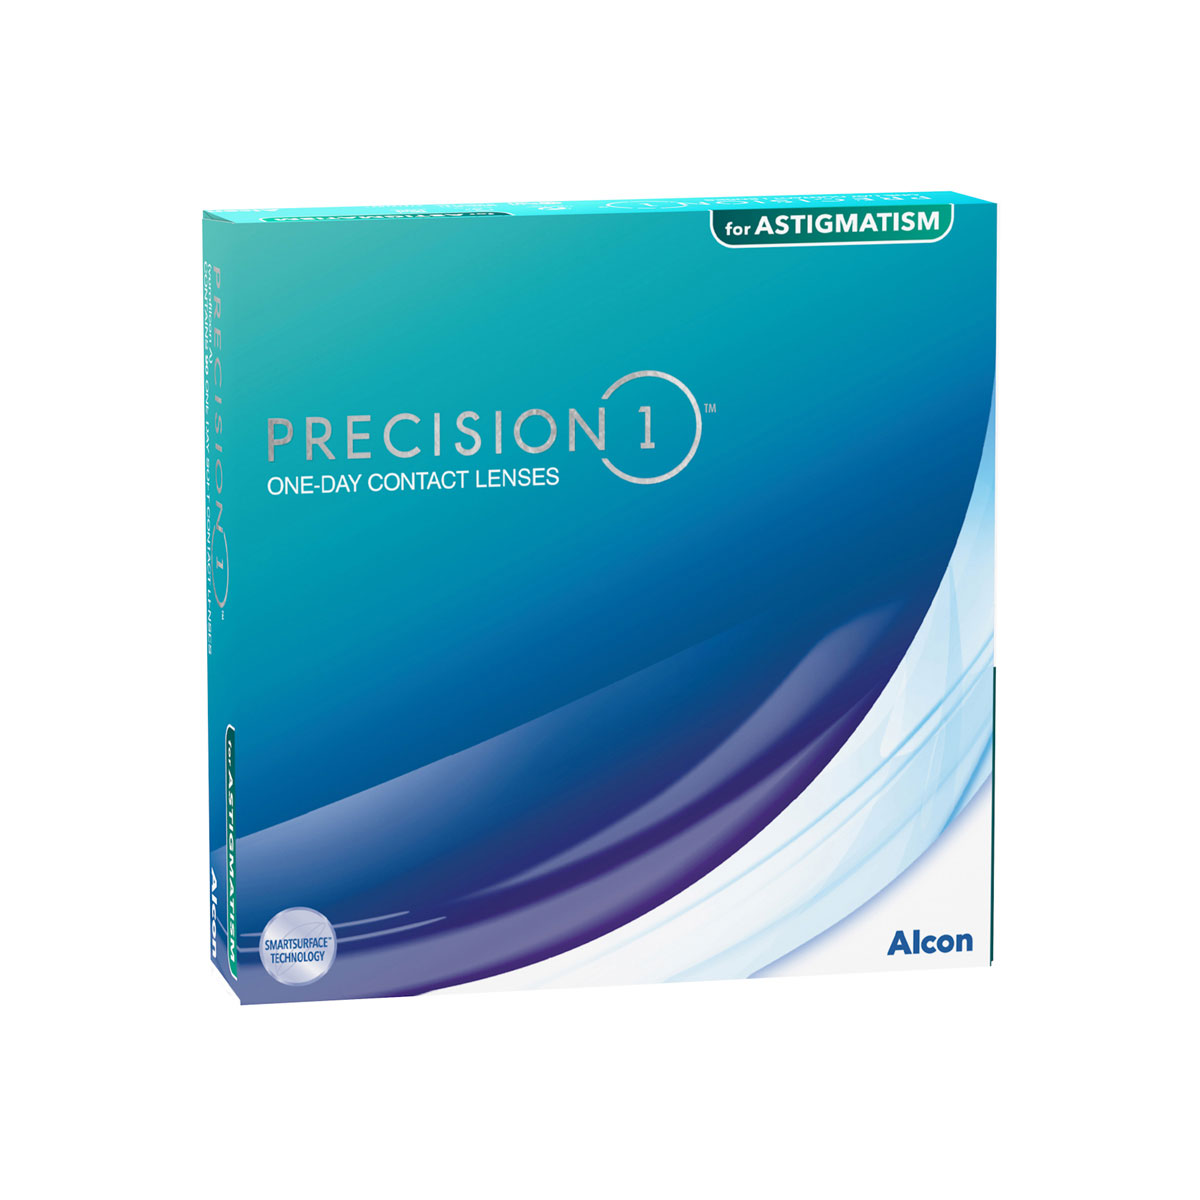 Precision 1 for Astigmatism (90 Contact Lenses), Alcon, Toric Daily Disposables, Silicone Hydrogel